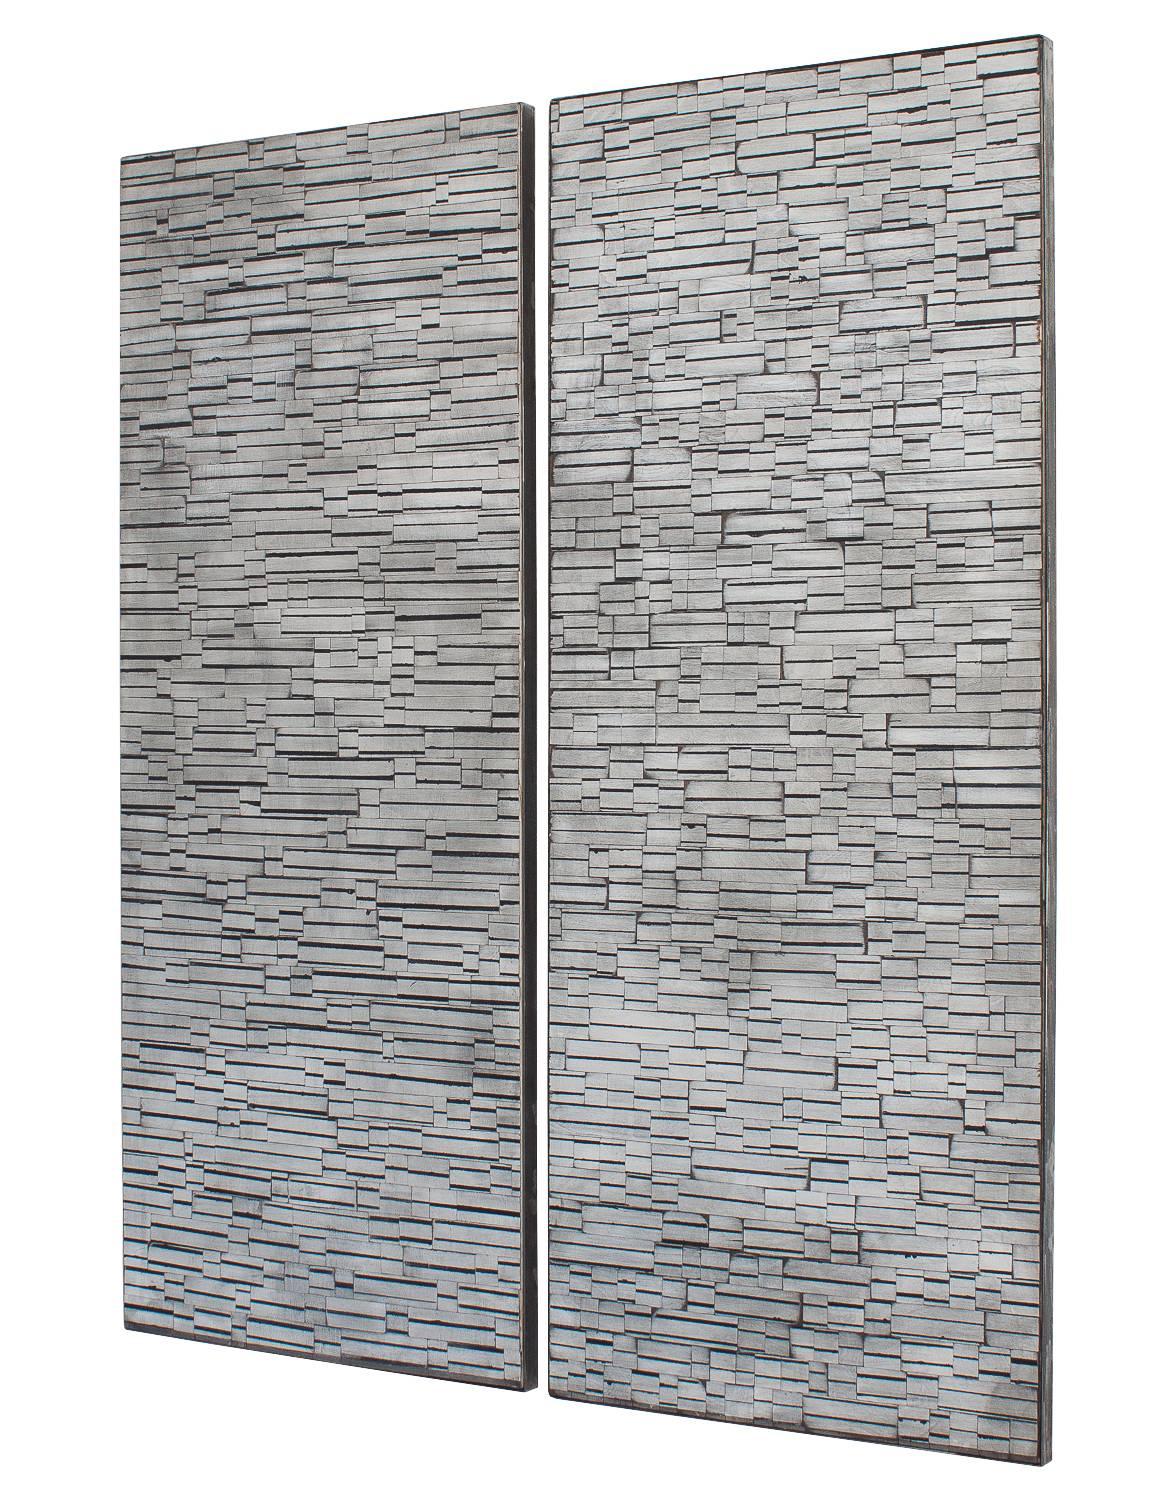 Contemporary abstract artwork by Chicago artist Michelle Peterson Albandoz. Painted, stained and washed Minimalist wood assemblage. The illusion of a high relief texture and visual depth is created by the hand-worked placement of rectangular